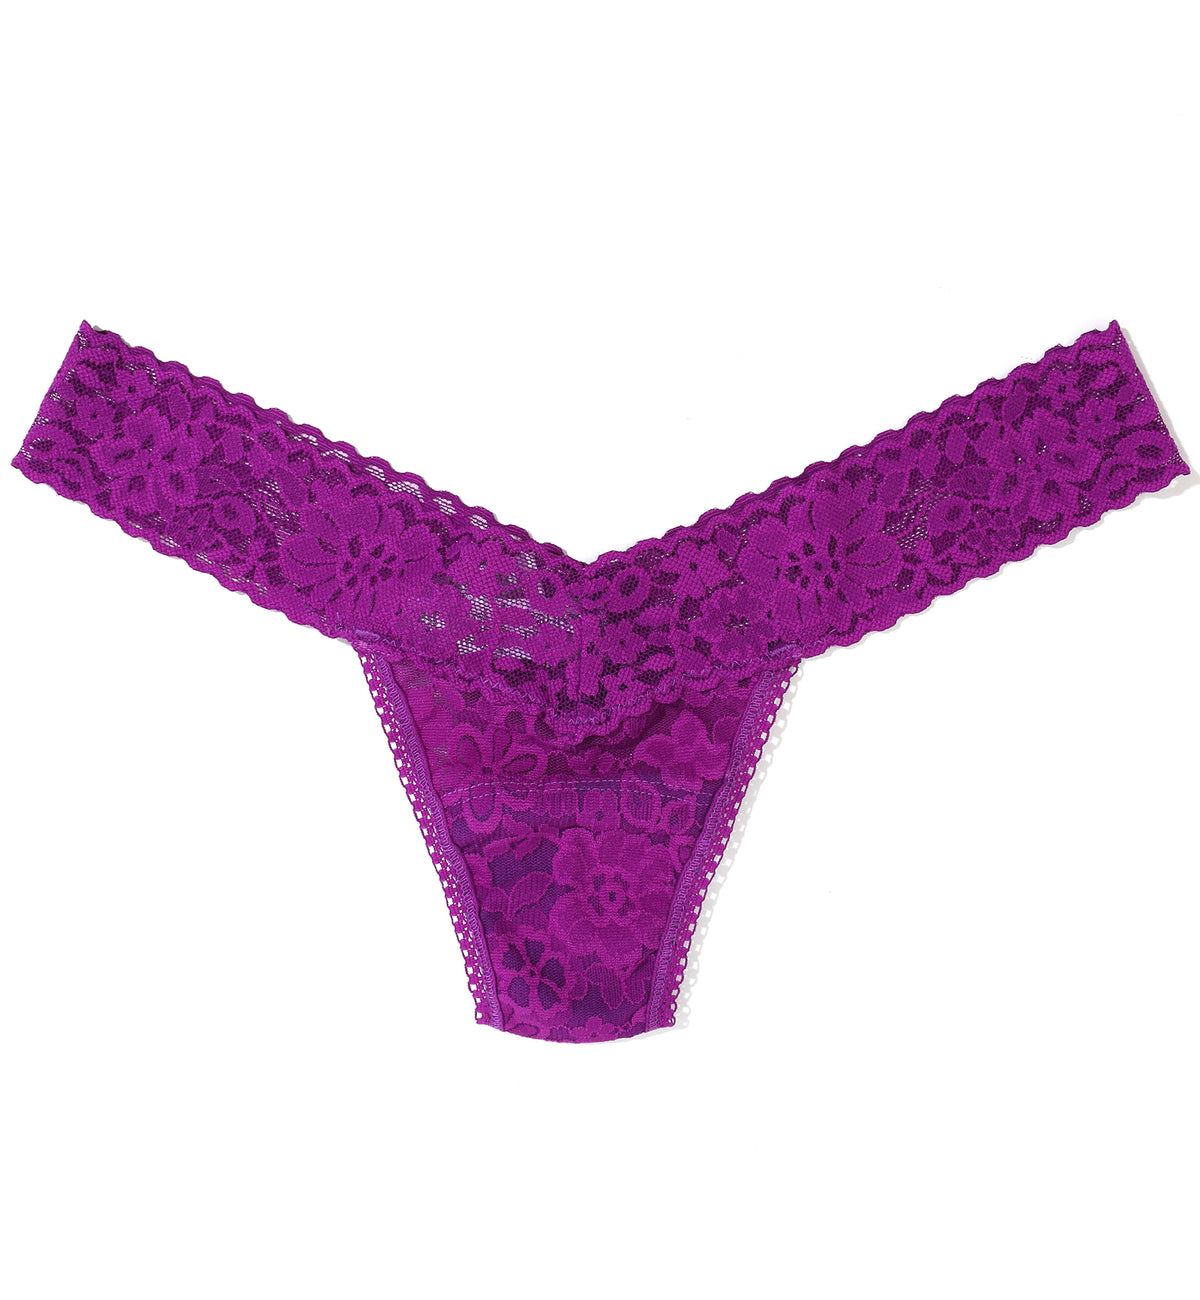 Hanky Panky Daily Lace Low Rise Thong (771001P),Aster Garland - Aster Garland,One Size